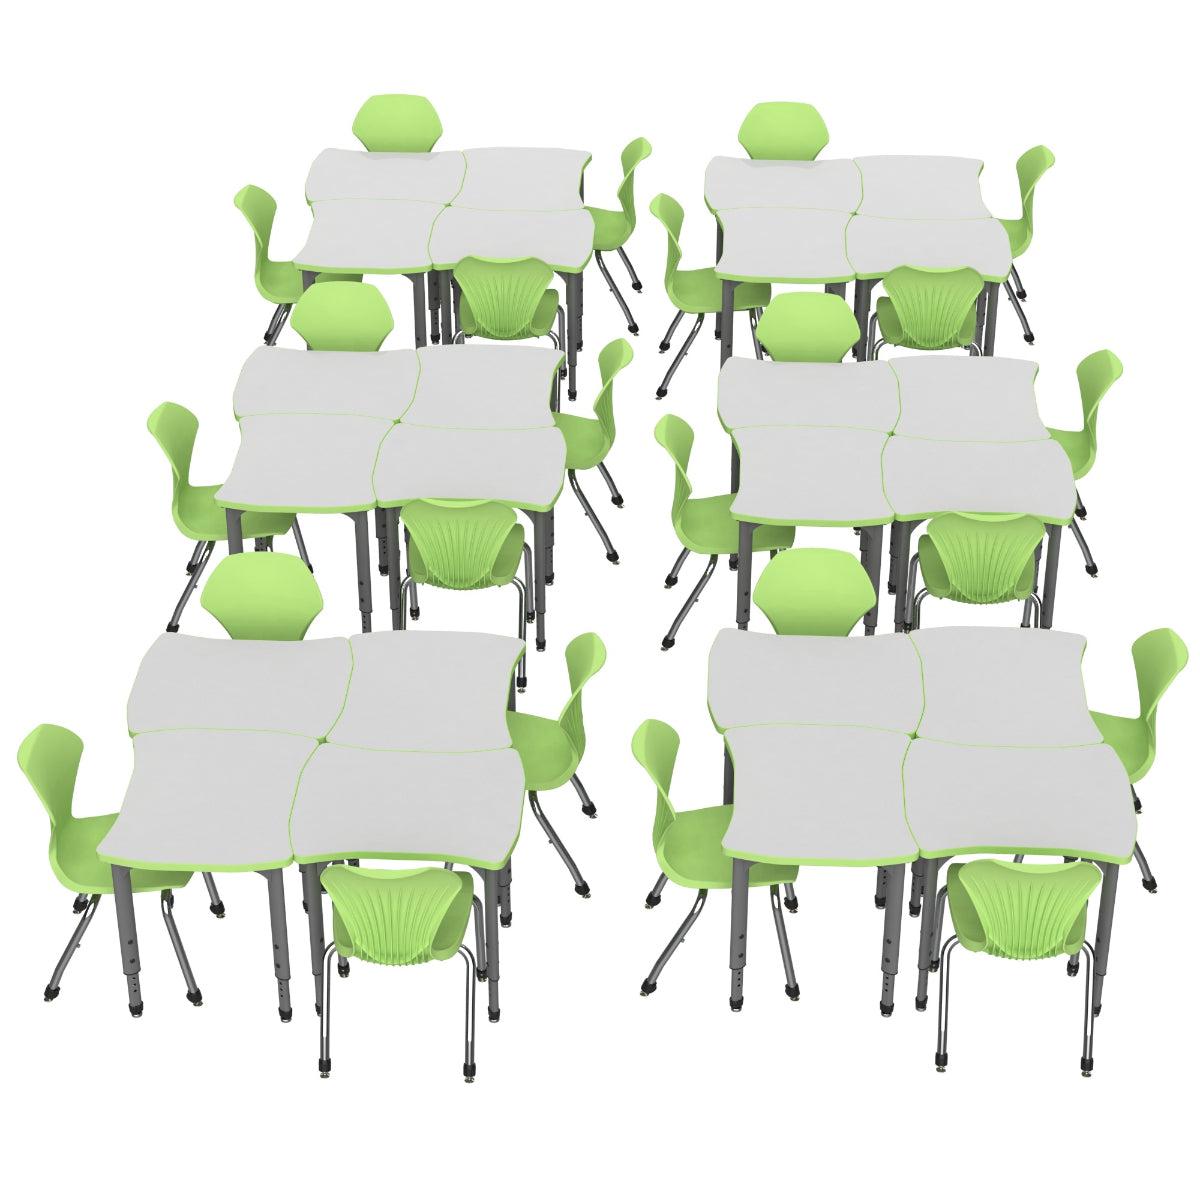 Apex Dry Erase Classroom Desk and Chair Package, 24 Dog Bone Collaborative Student Desks with 24 Apex Stack Chairs